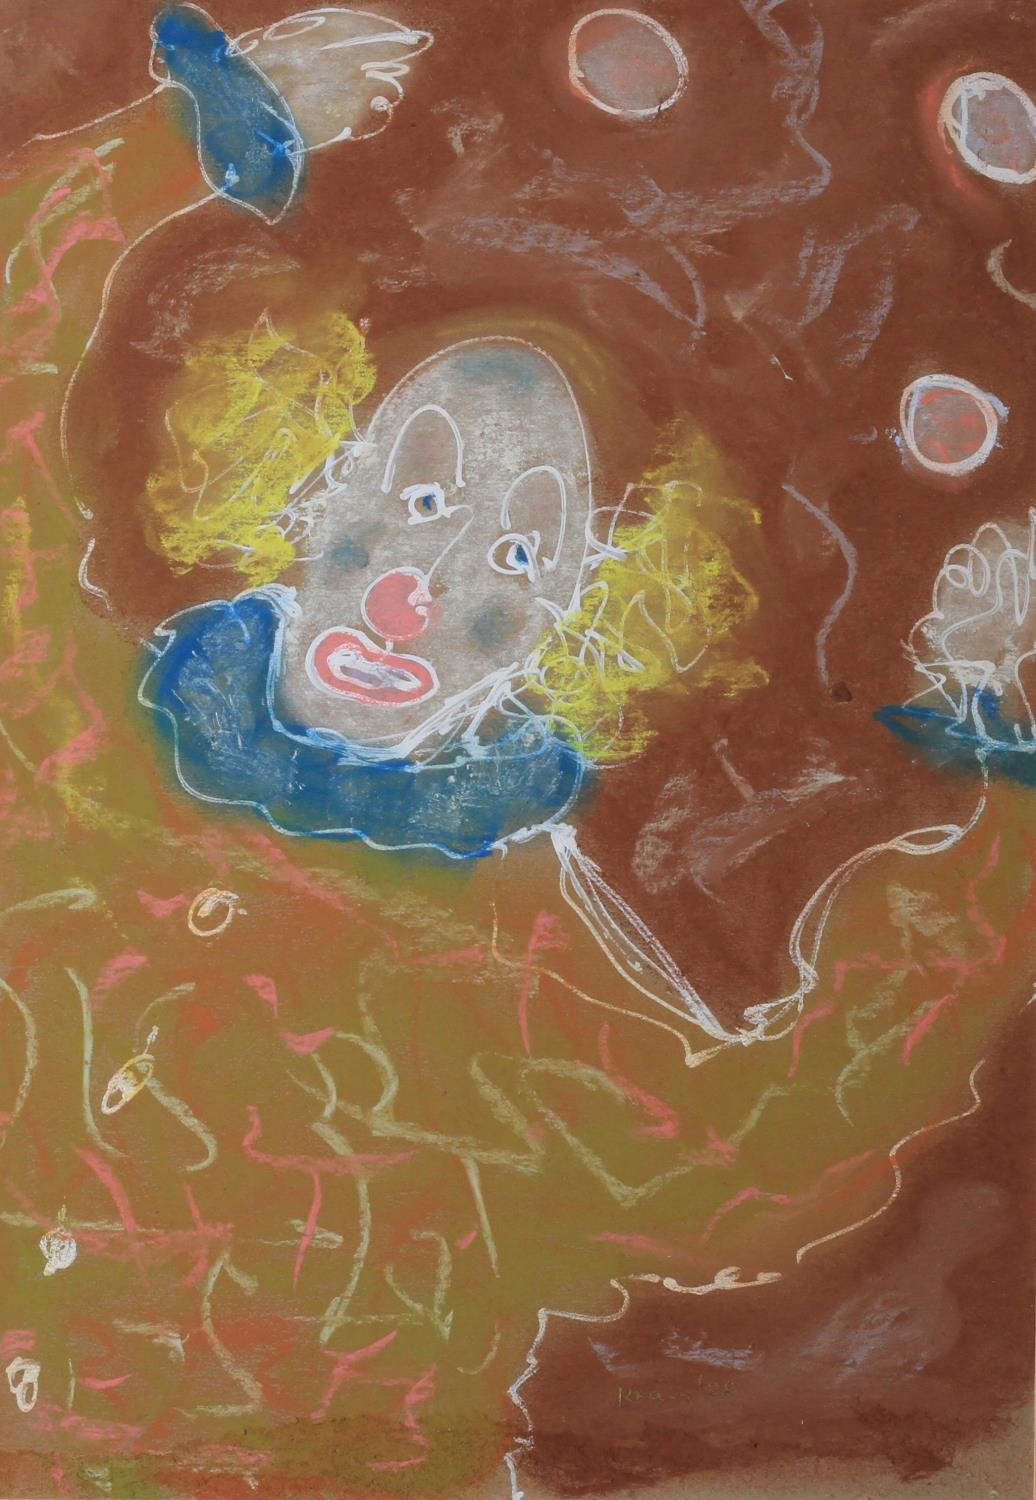 ARR Rachmiel Kranz (20th century), Clown with balloons, mixed media, signed and dated (19)88 to